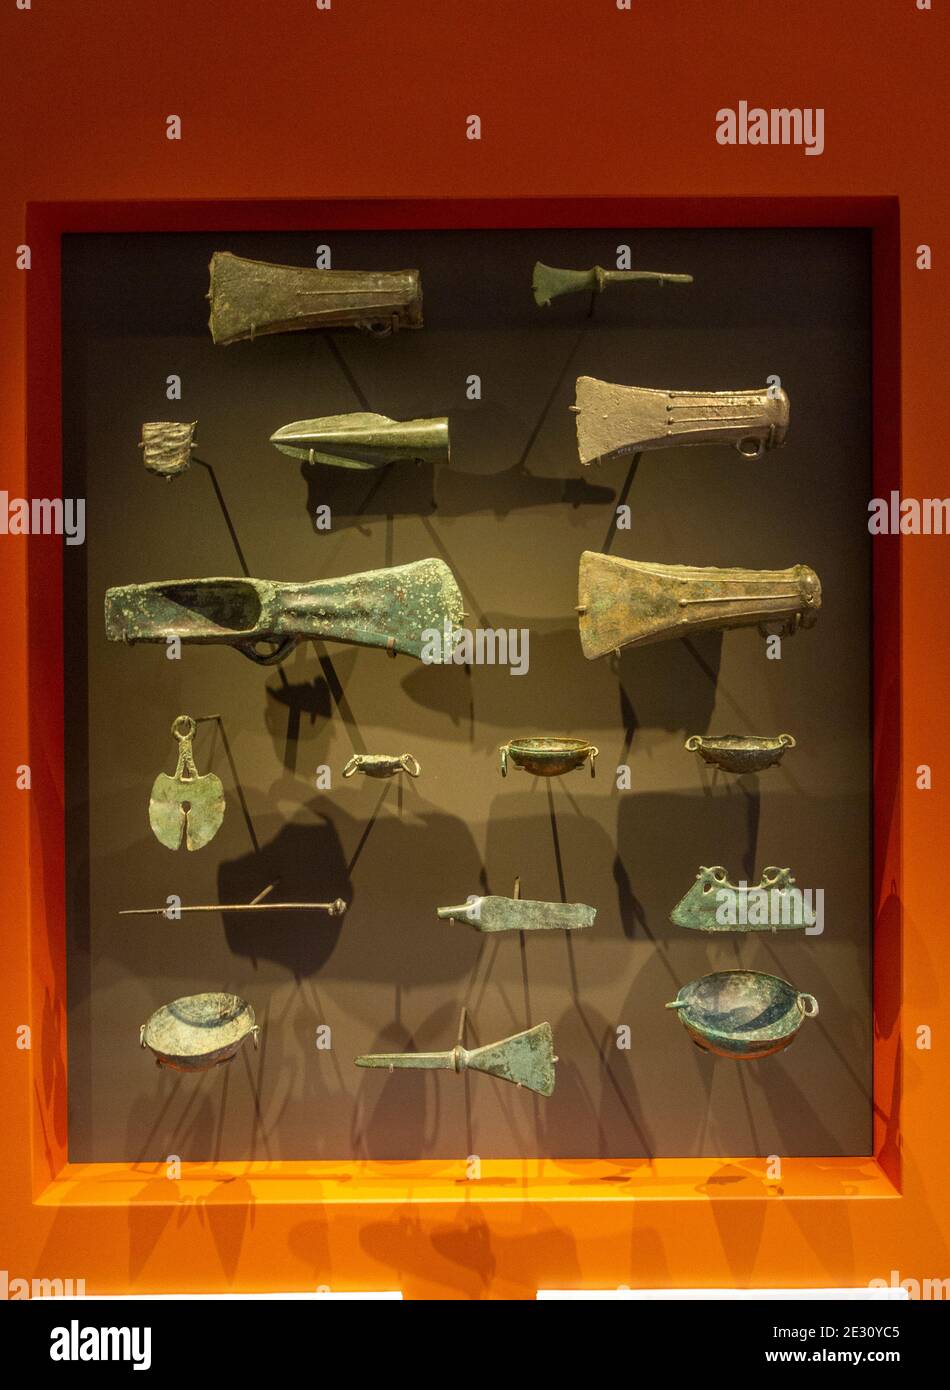 A selection of Iron Age (200-50BC) prehistoric metal objects found in the Salisbury Hoard. The Salisbury Museum, Salisbury, Wiltshire, UK. Stock Photo